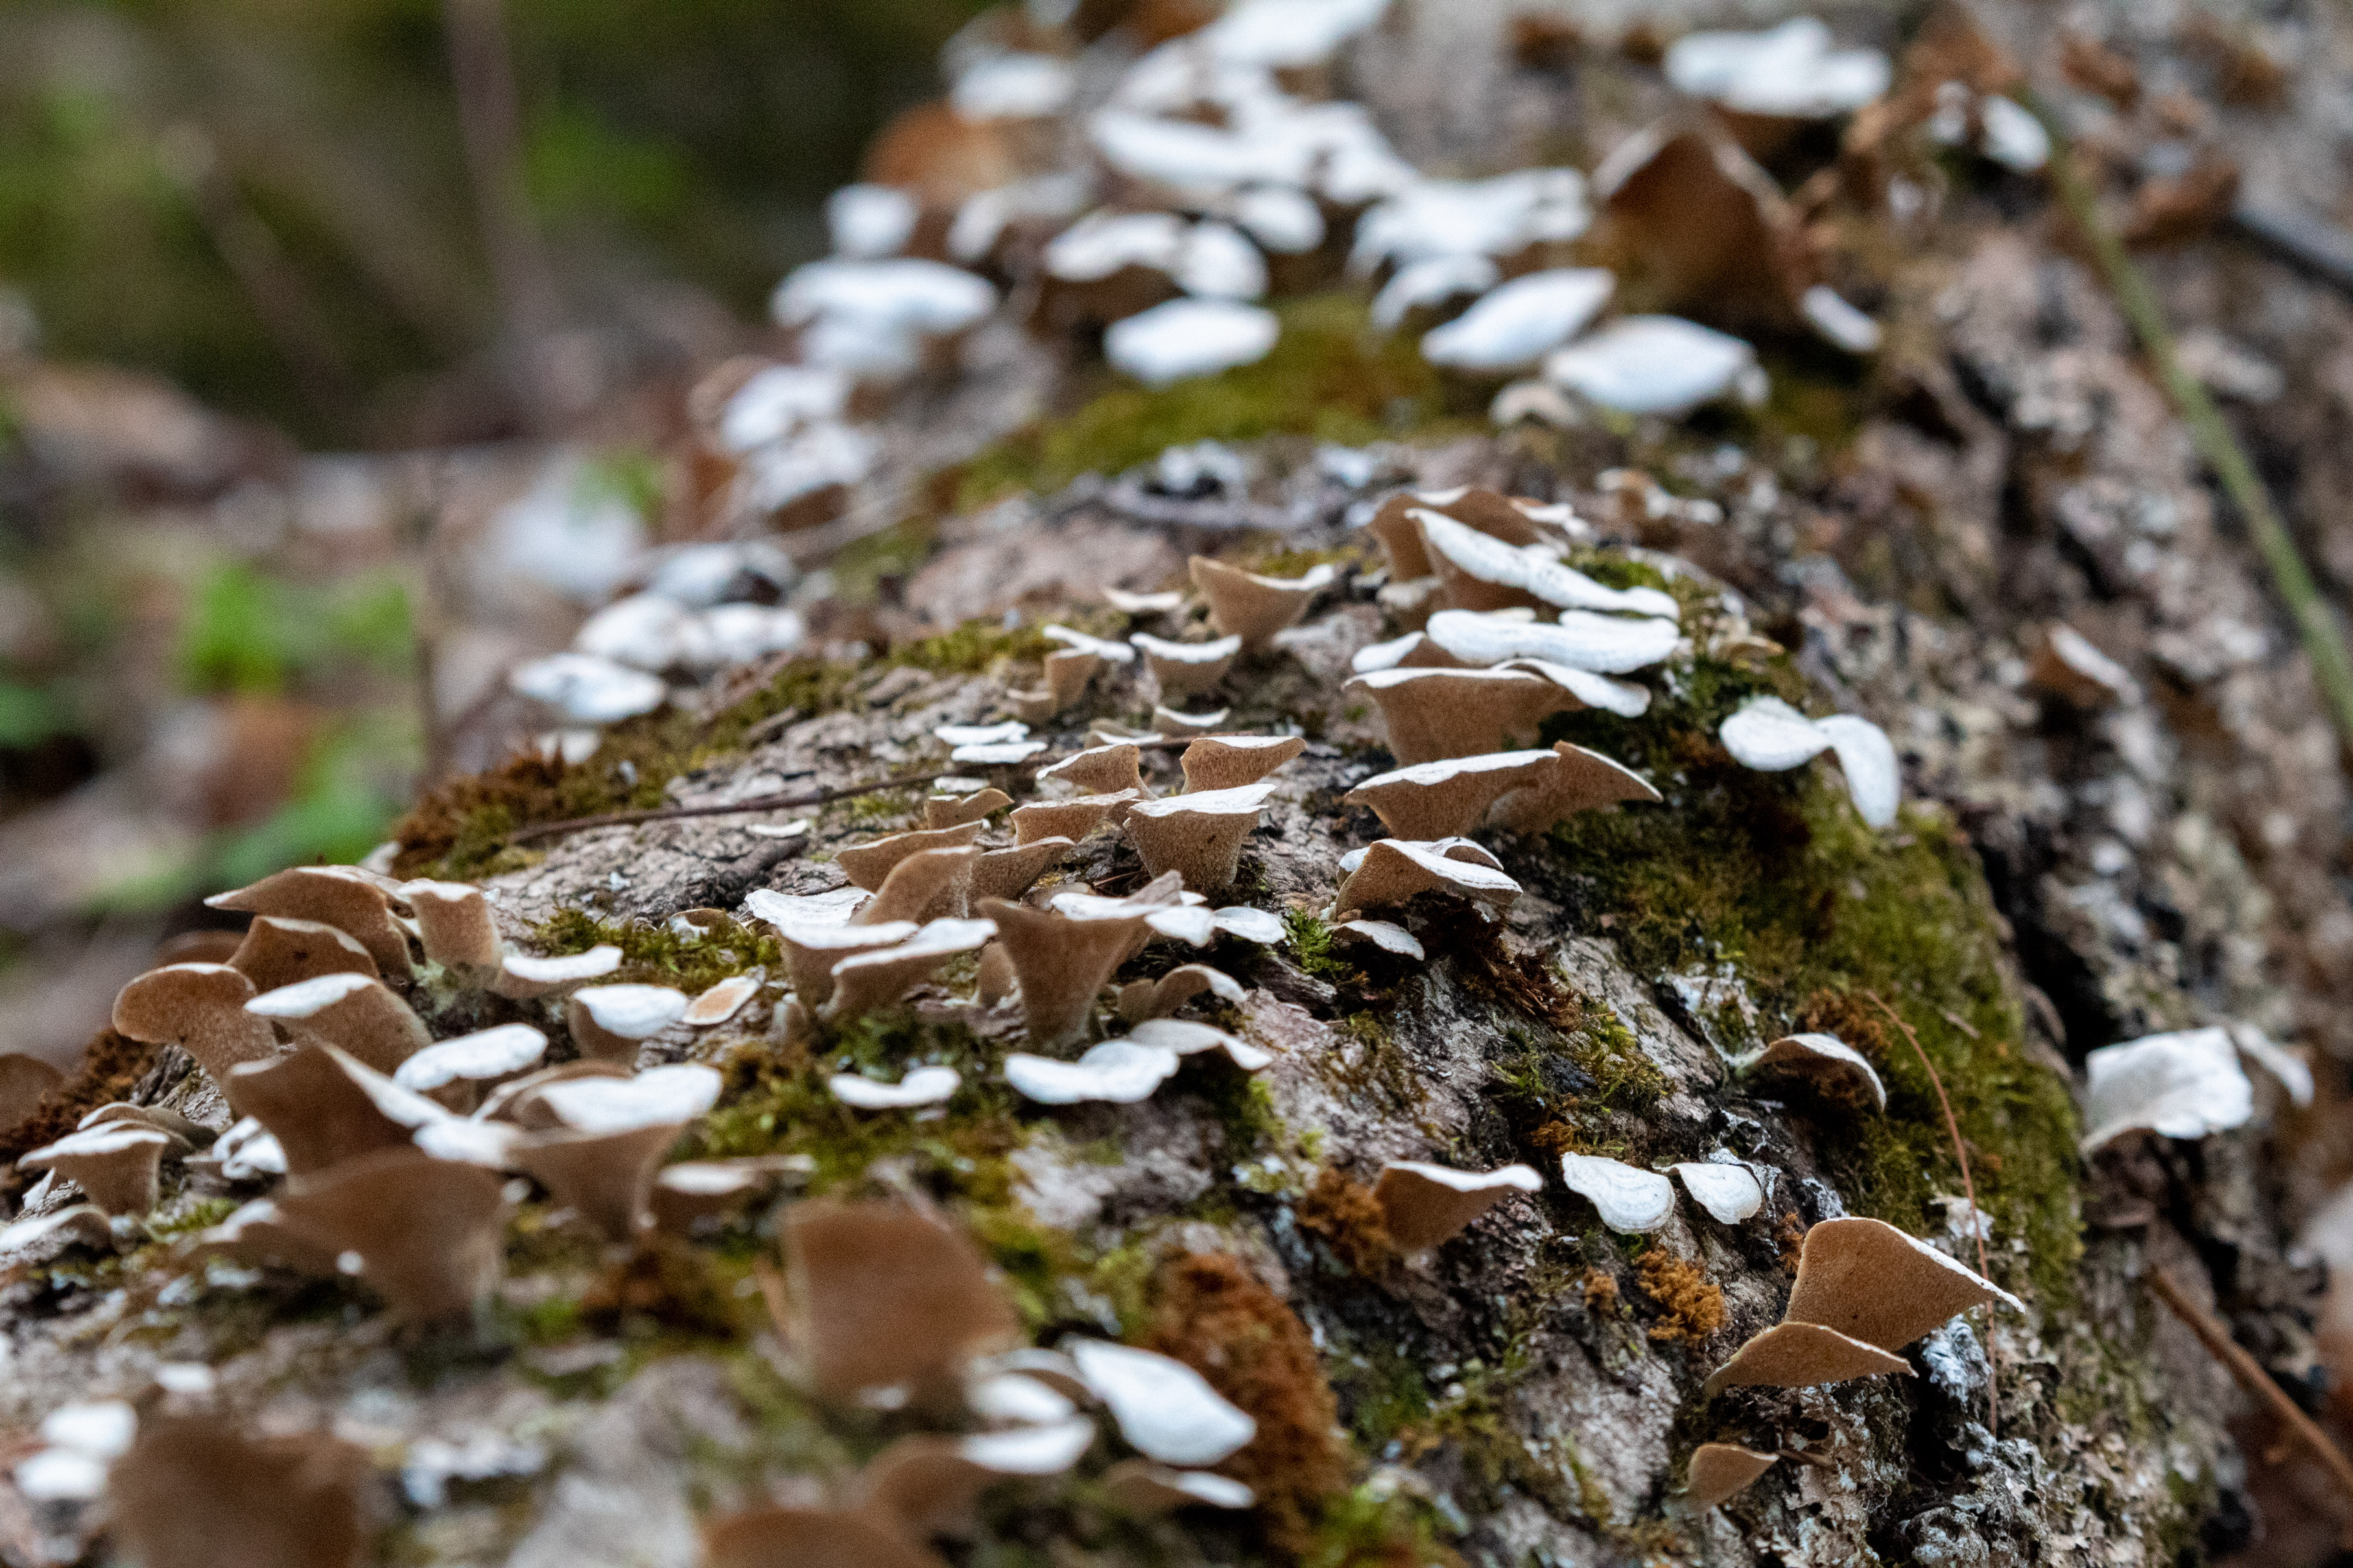 Seashell-shaped fungus growing on the moss-covered trunk of a fallen tree